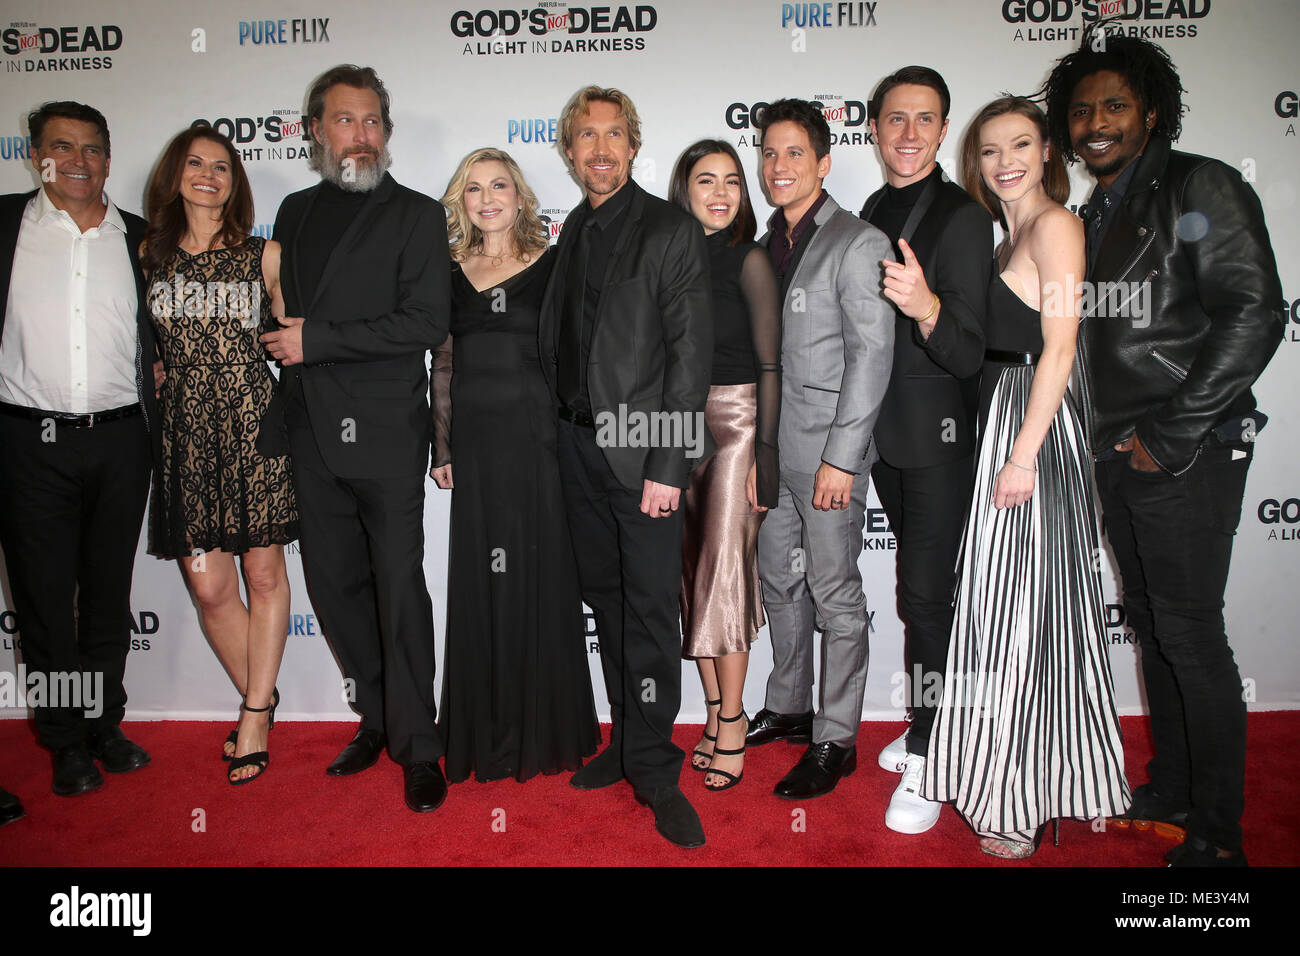 'God's Not Dead: A Light In Darkness' Premiere - Arrivals  Featuring: Ted McGinley, Jennifer Taylor, John Corbett, Tatum O'Neal, David A. R. White, Samantha Boscarino, Mike C. Manning, Shane Harper, Jenny Cipolla, Shwayze Where: Hollywood, California, United States When: 20 Mar 2018 Credit: FayesVision/WENN.com Stock Photo